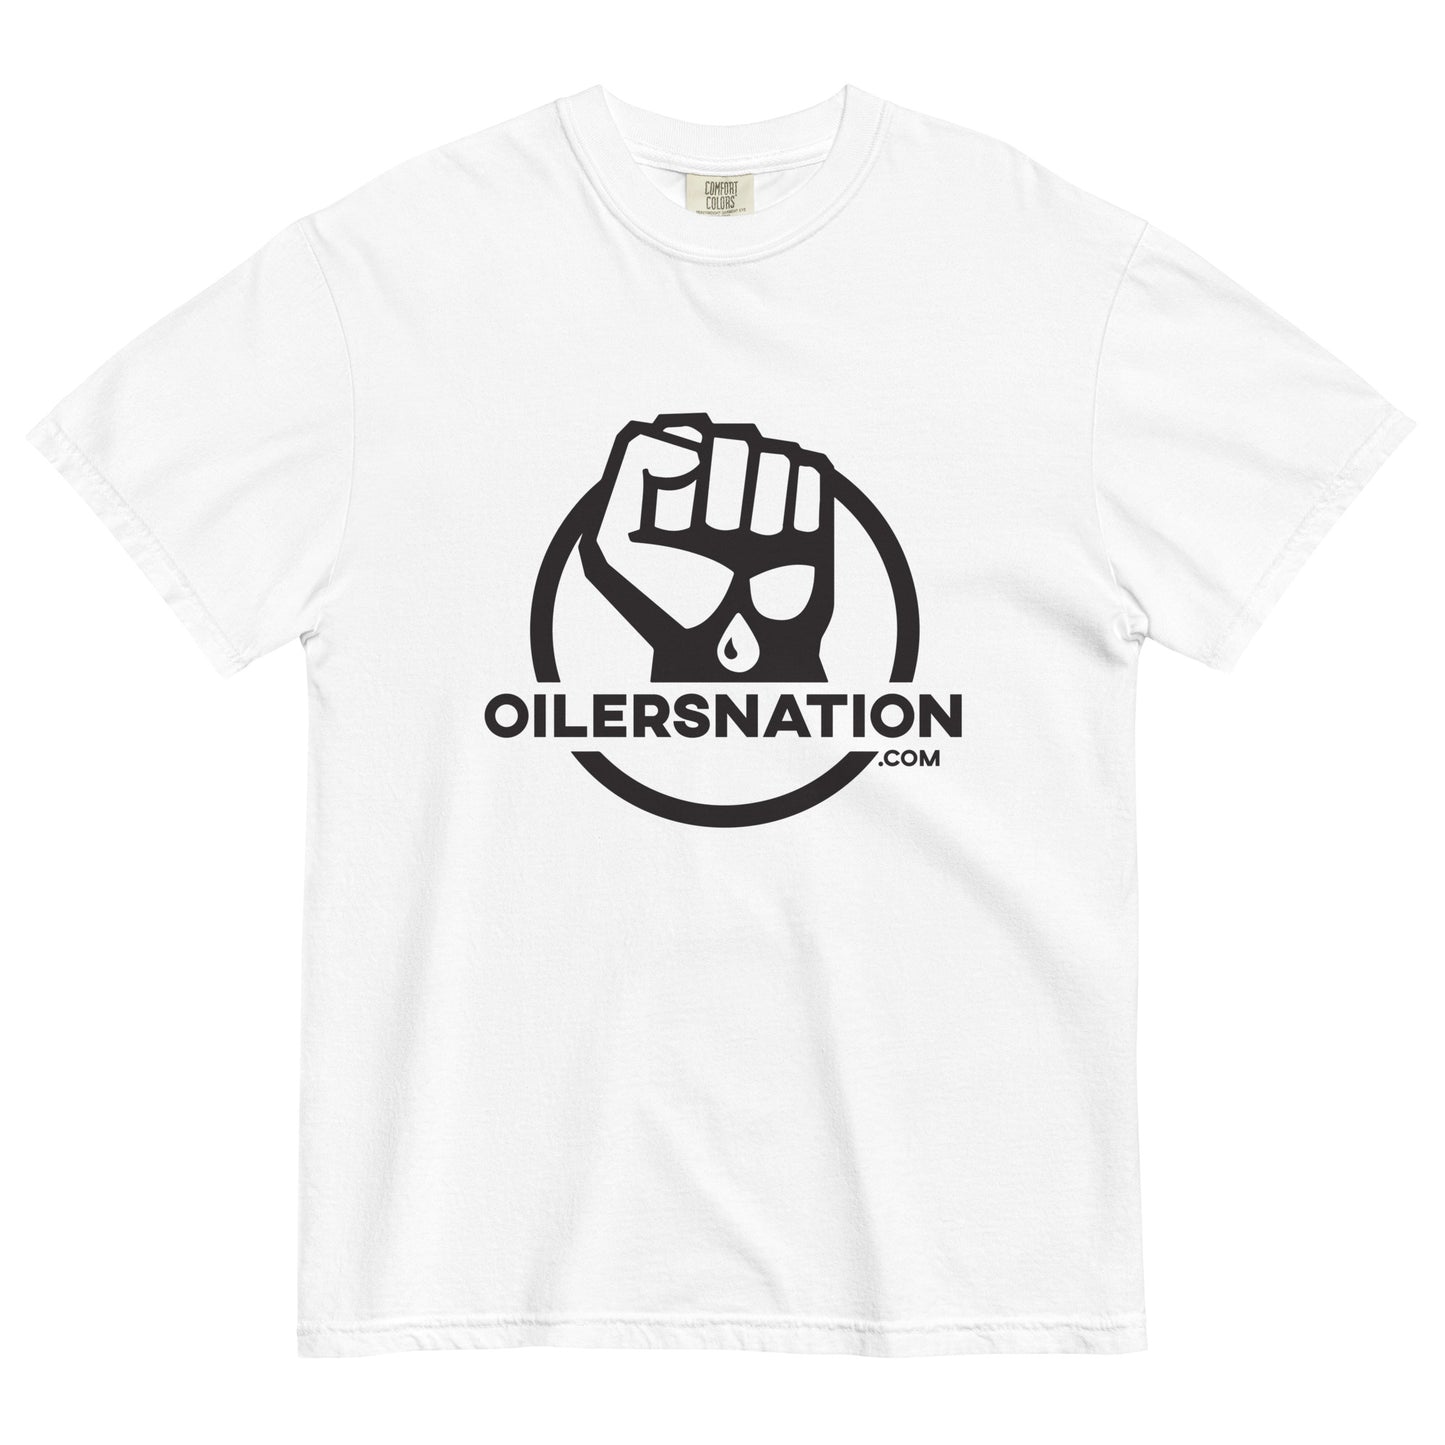 THE CLASSICS - Oilersnation Full Chest T-Shirt